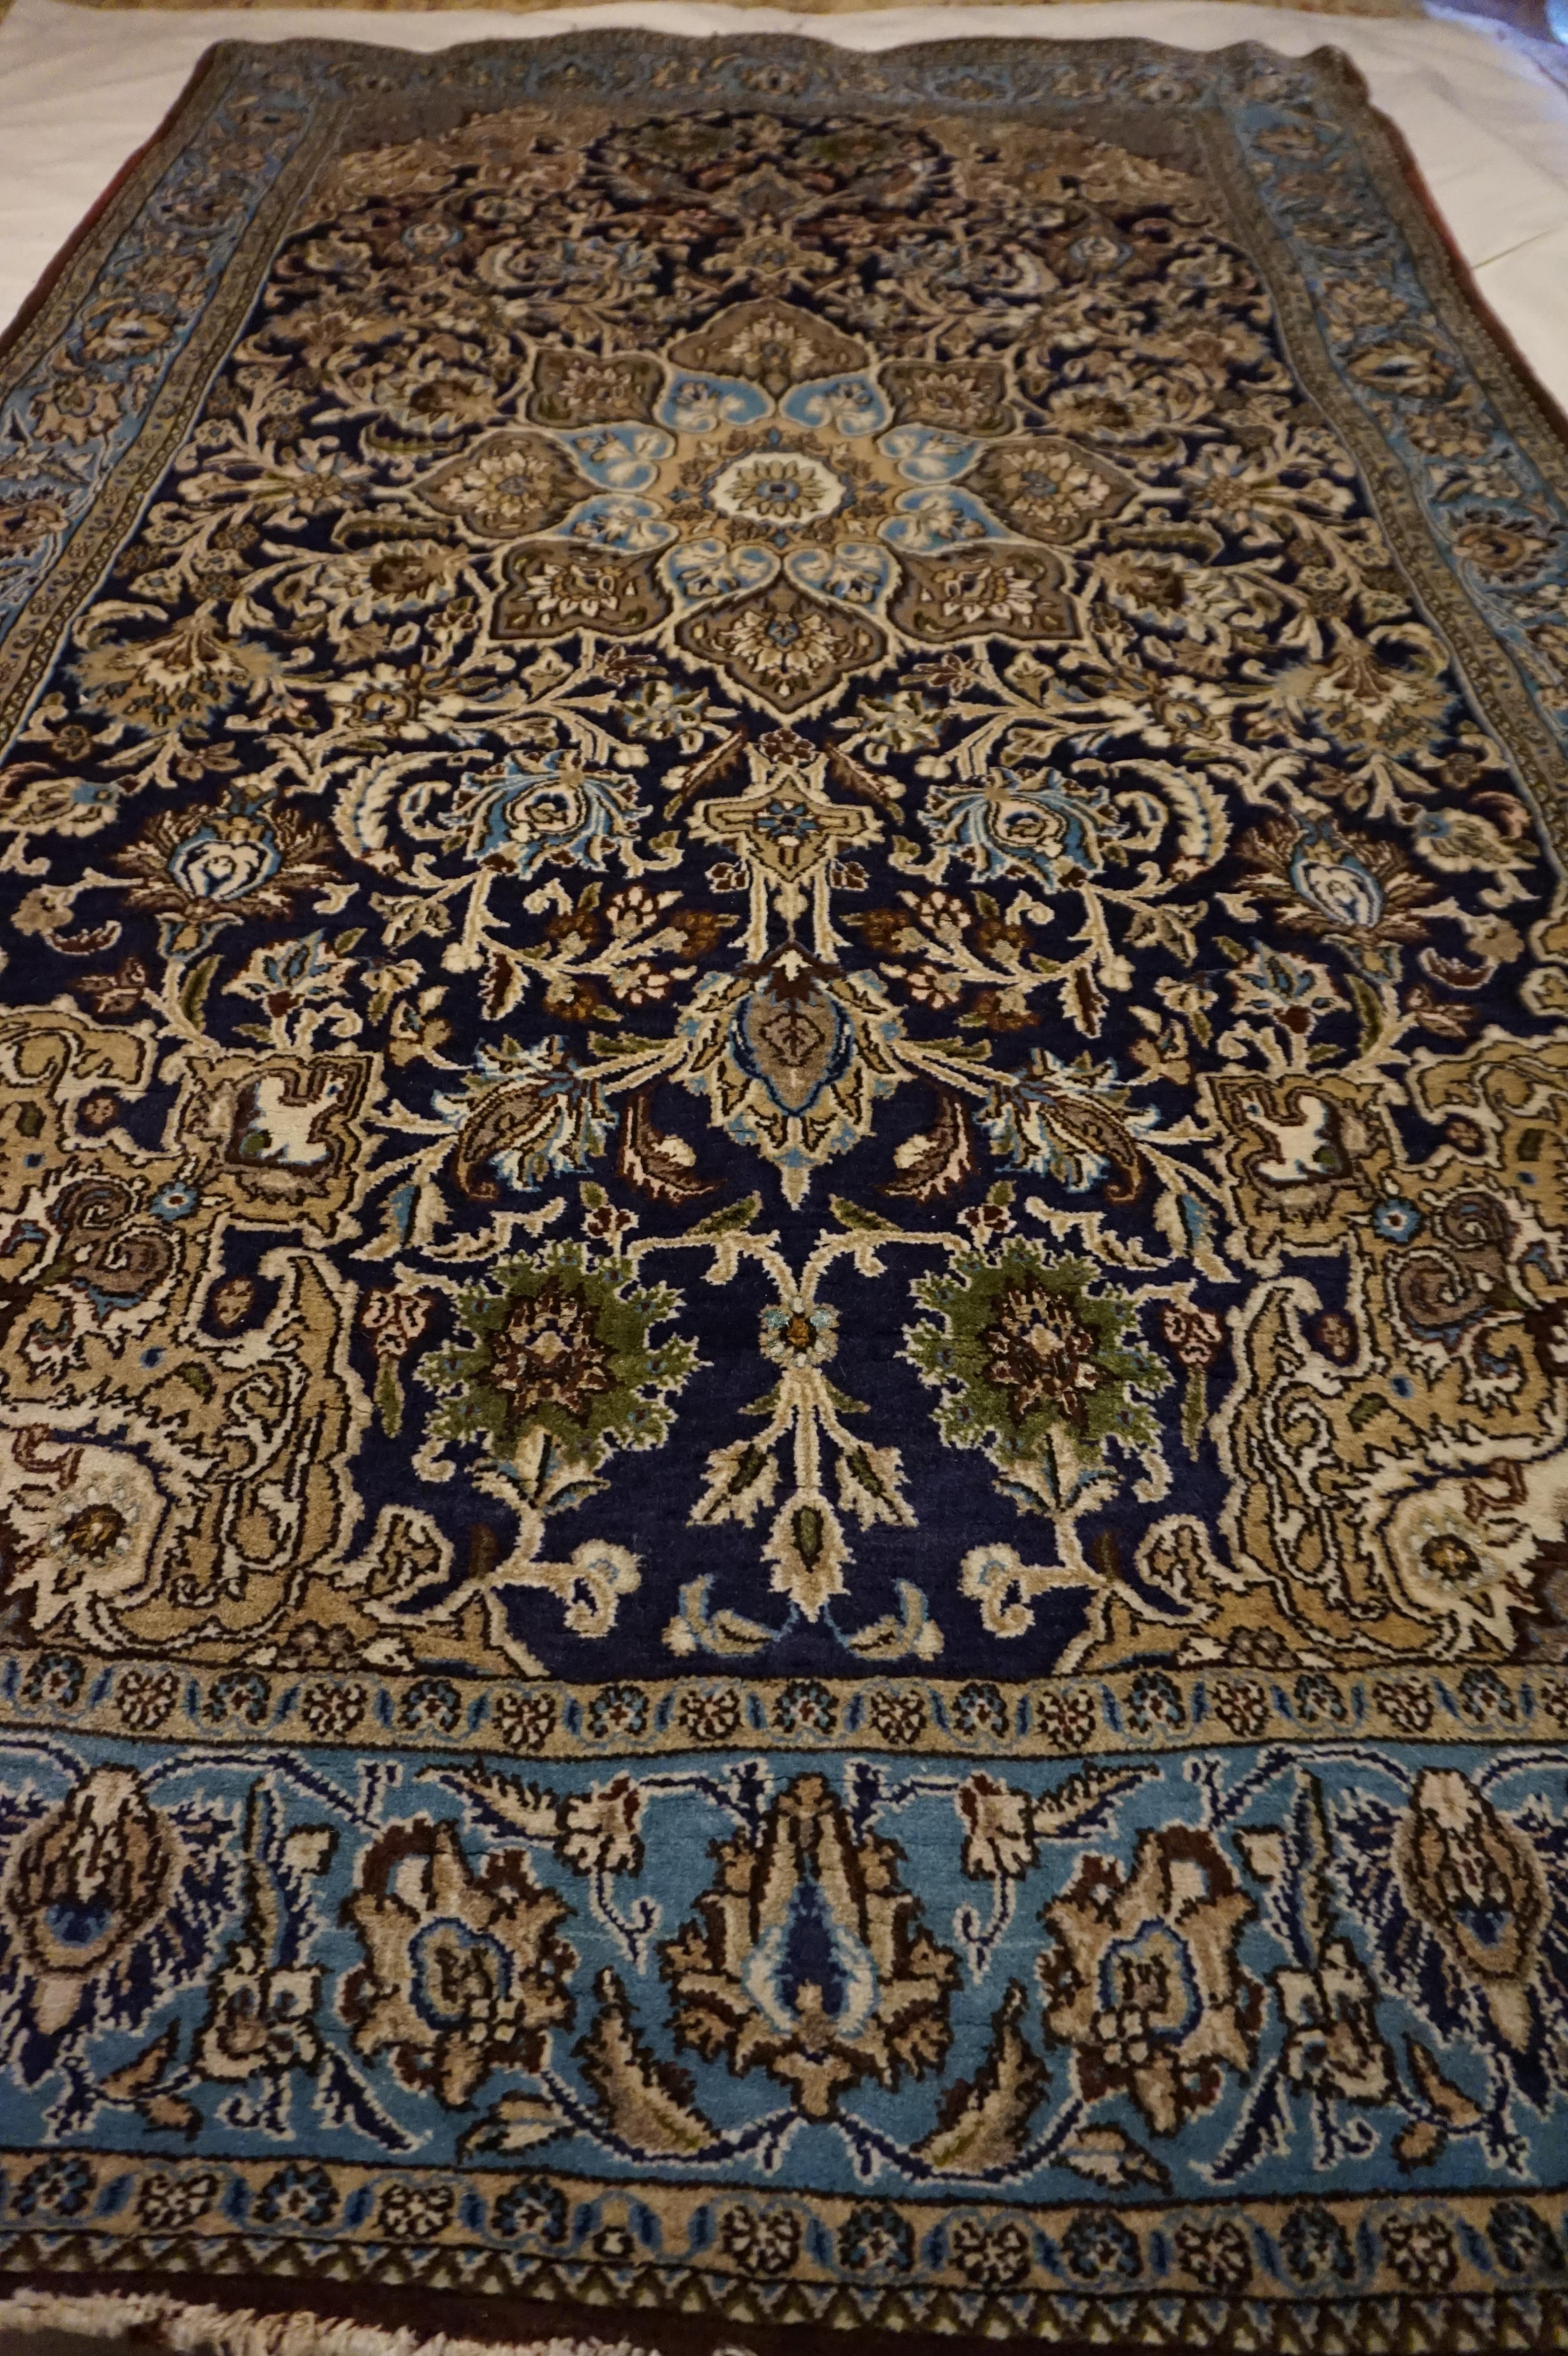 Indian Antique Kashmir Kashan Rug Hand-knotted In Pure Wool In Indigo, Blues & Browns For Sale